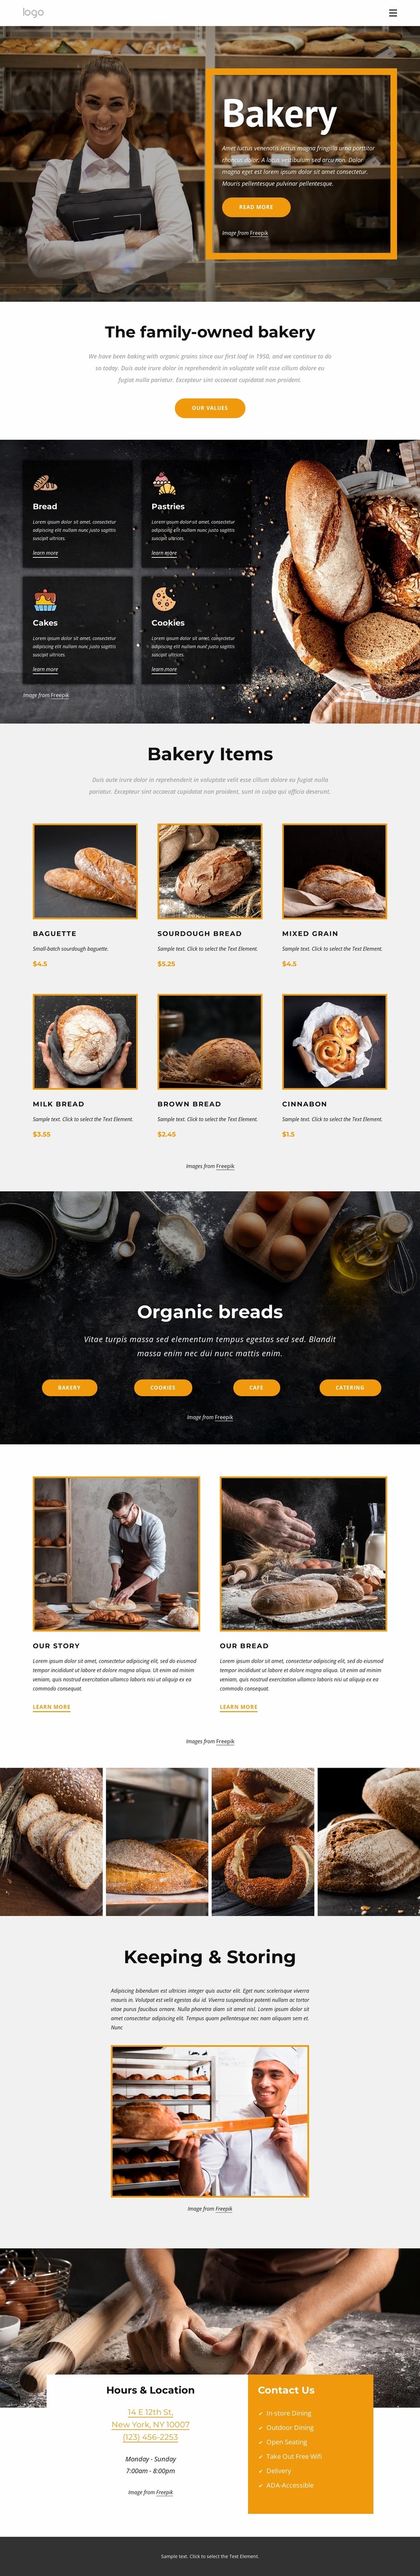 The family-owned bakery Website Template